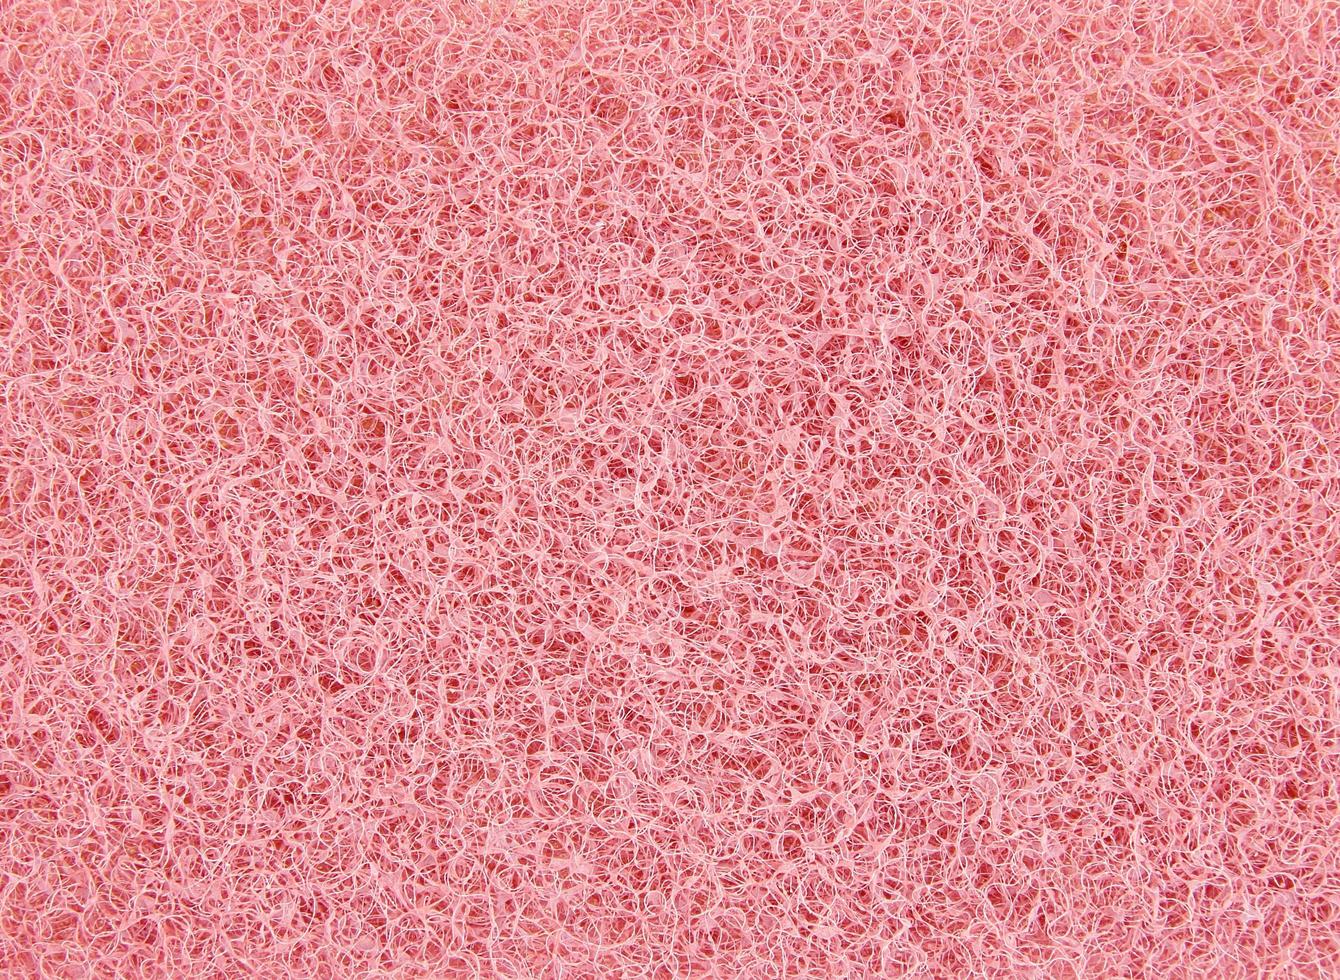 abstract red sponge texture for background photo